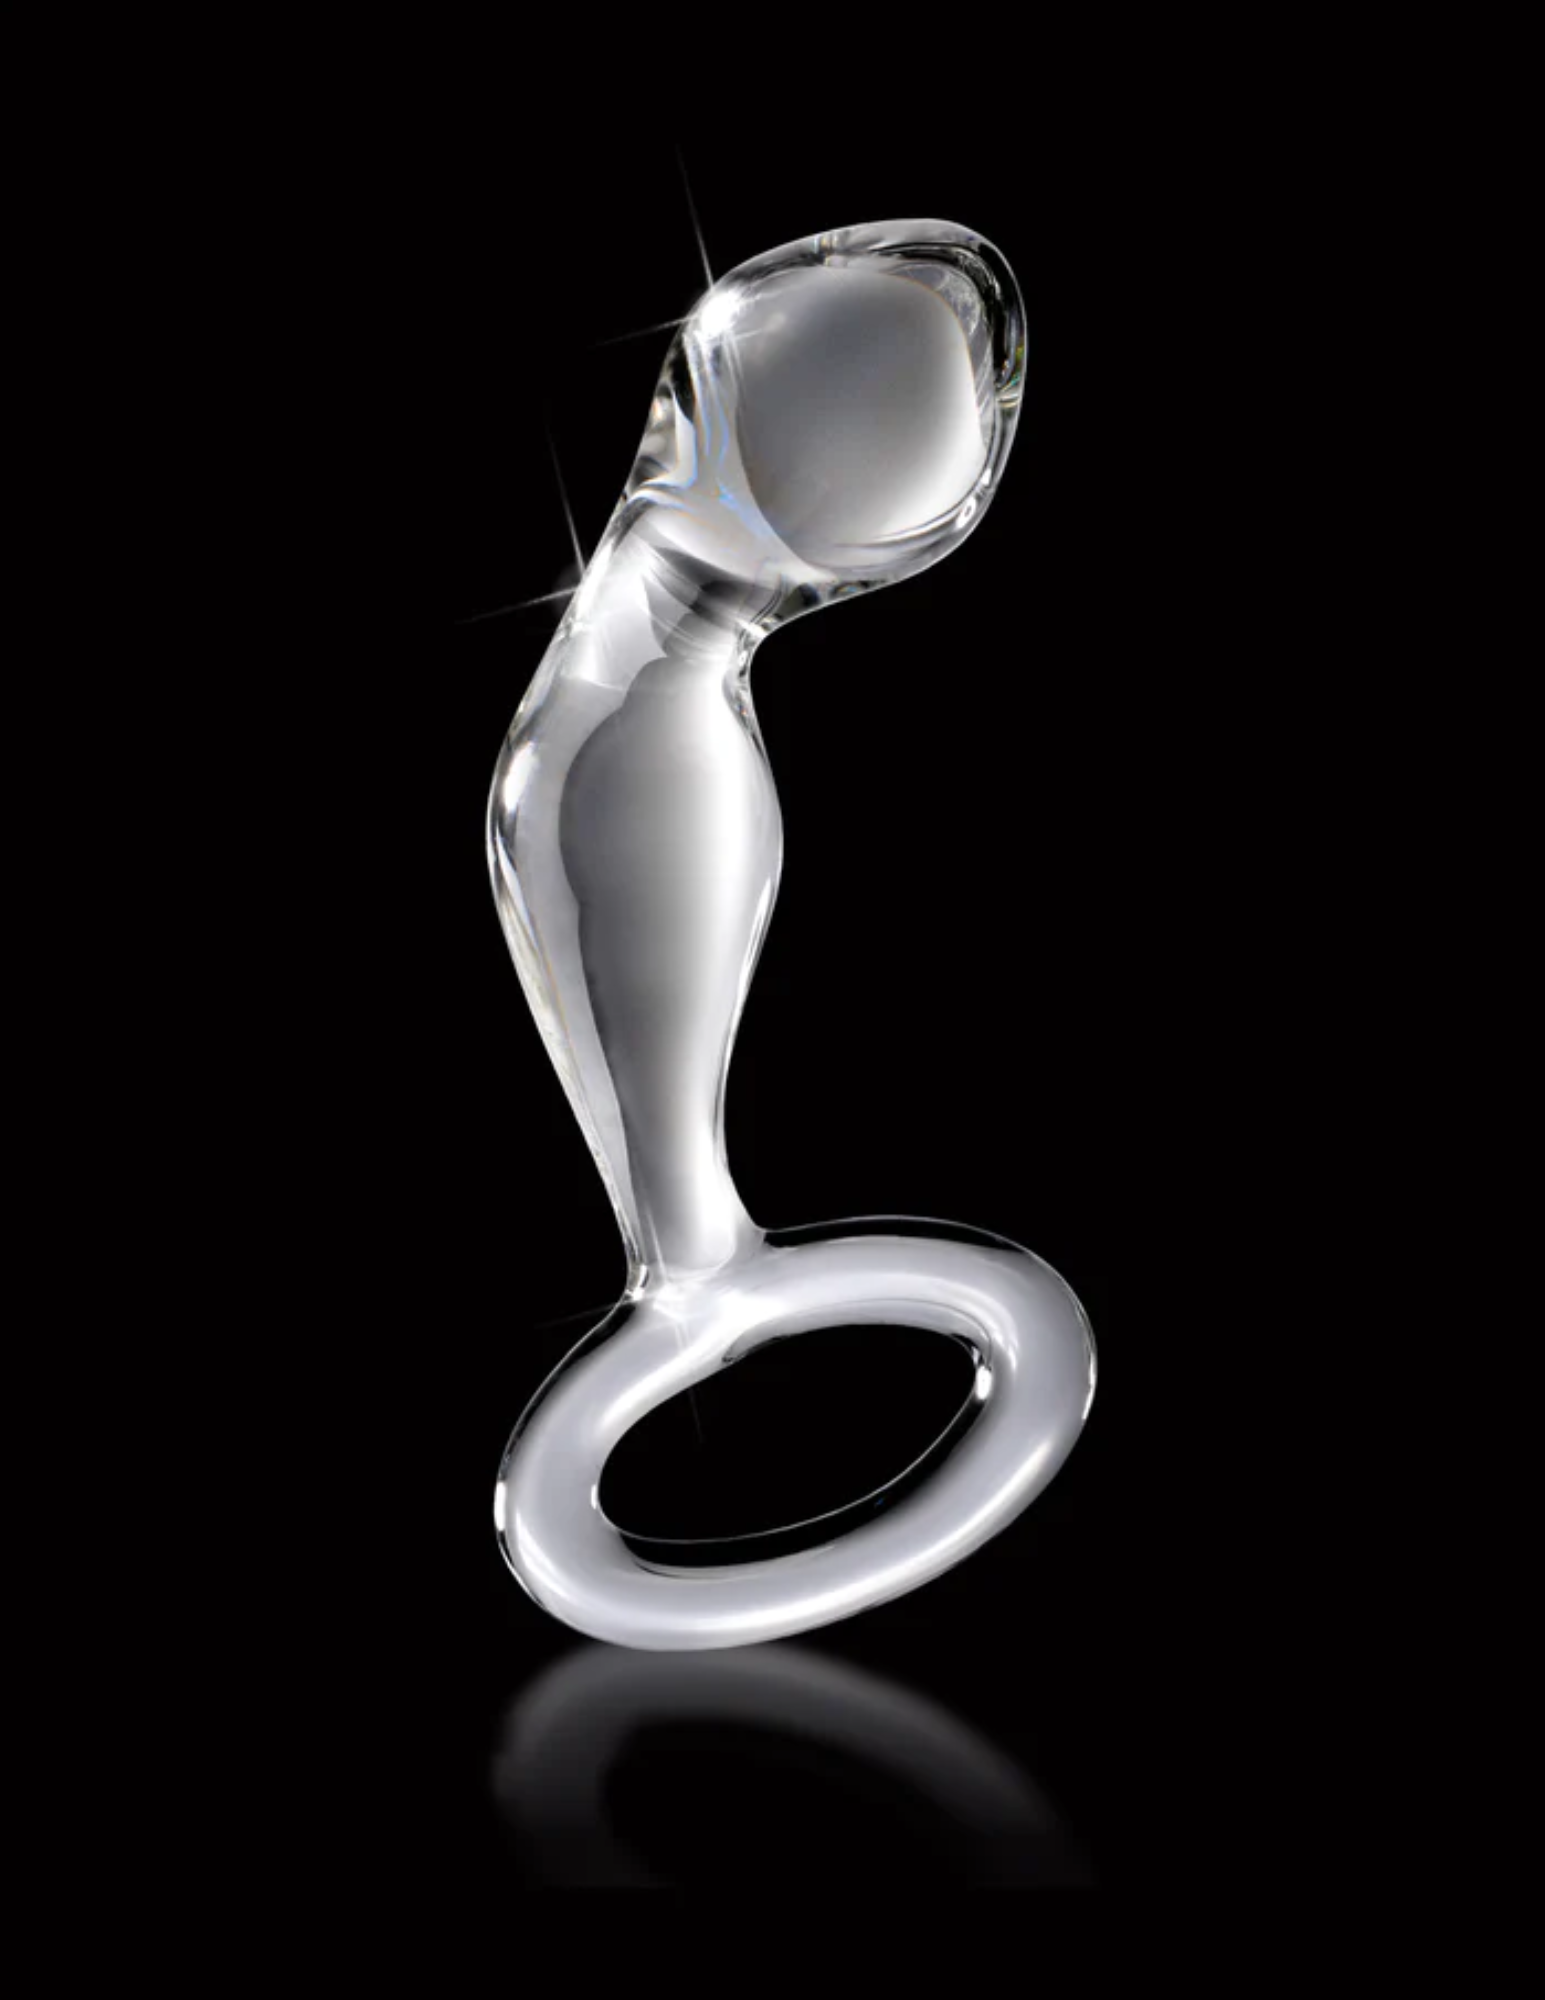 Front view of the Icicles No. 46 Glass Anal P-Spot Plug from Pipedreams (clear) shows its easy to hold handle and contoured shape.